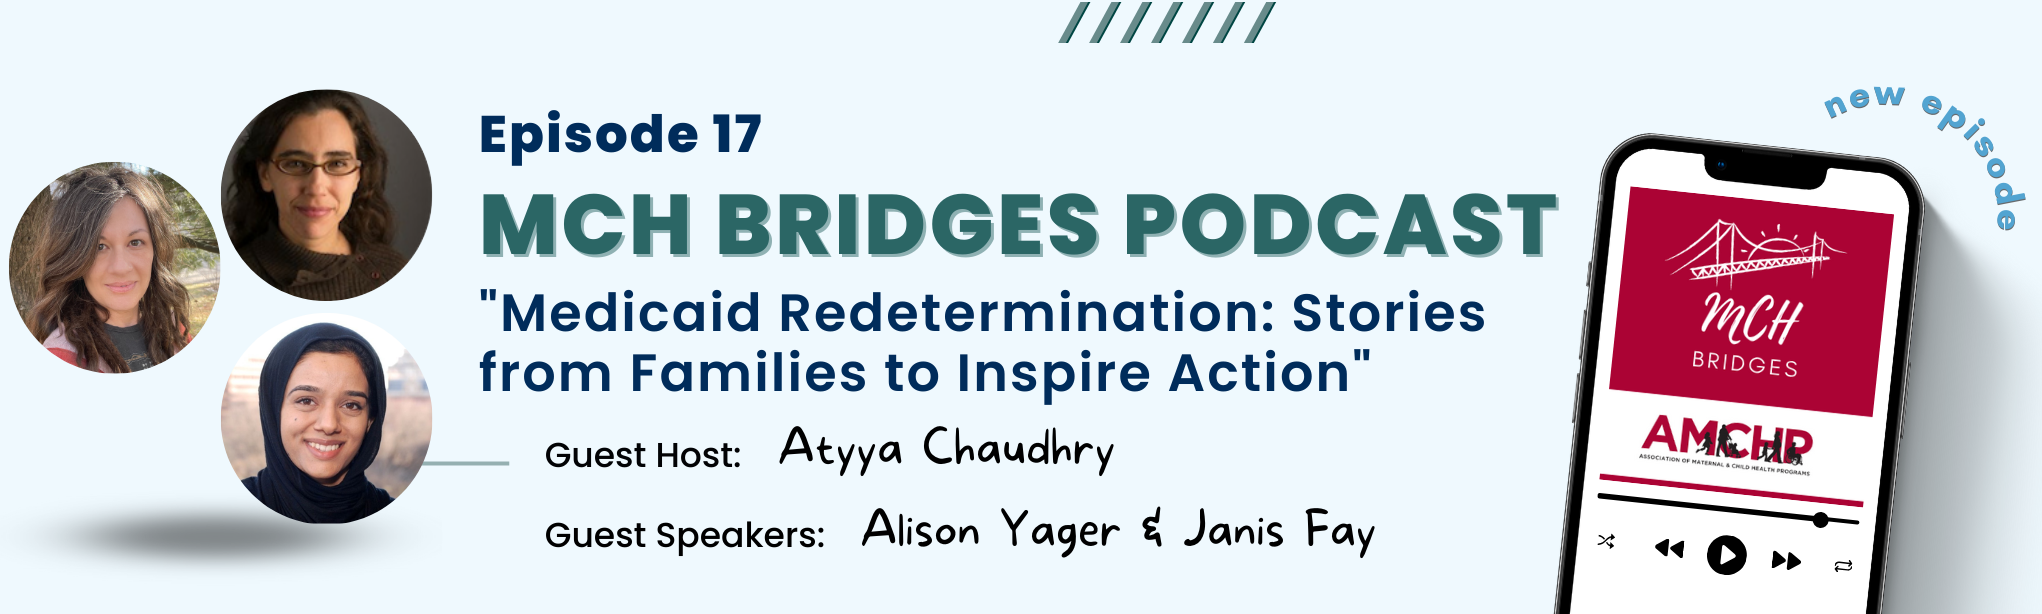 Banner alerting of new MCH Bridges episode 17. "Medicaid Redetermination: Stories from Families to Inspire Action." Guest host: Atyya Chaudhry. Guest speakers: Alison Yager and Janis Fay.